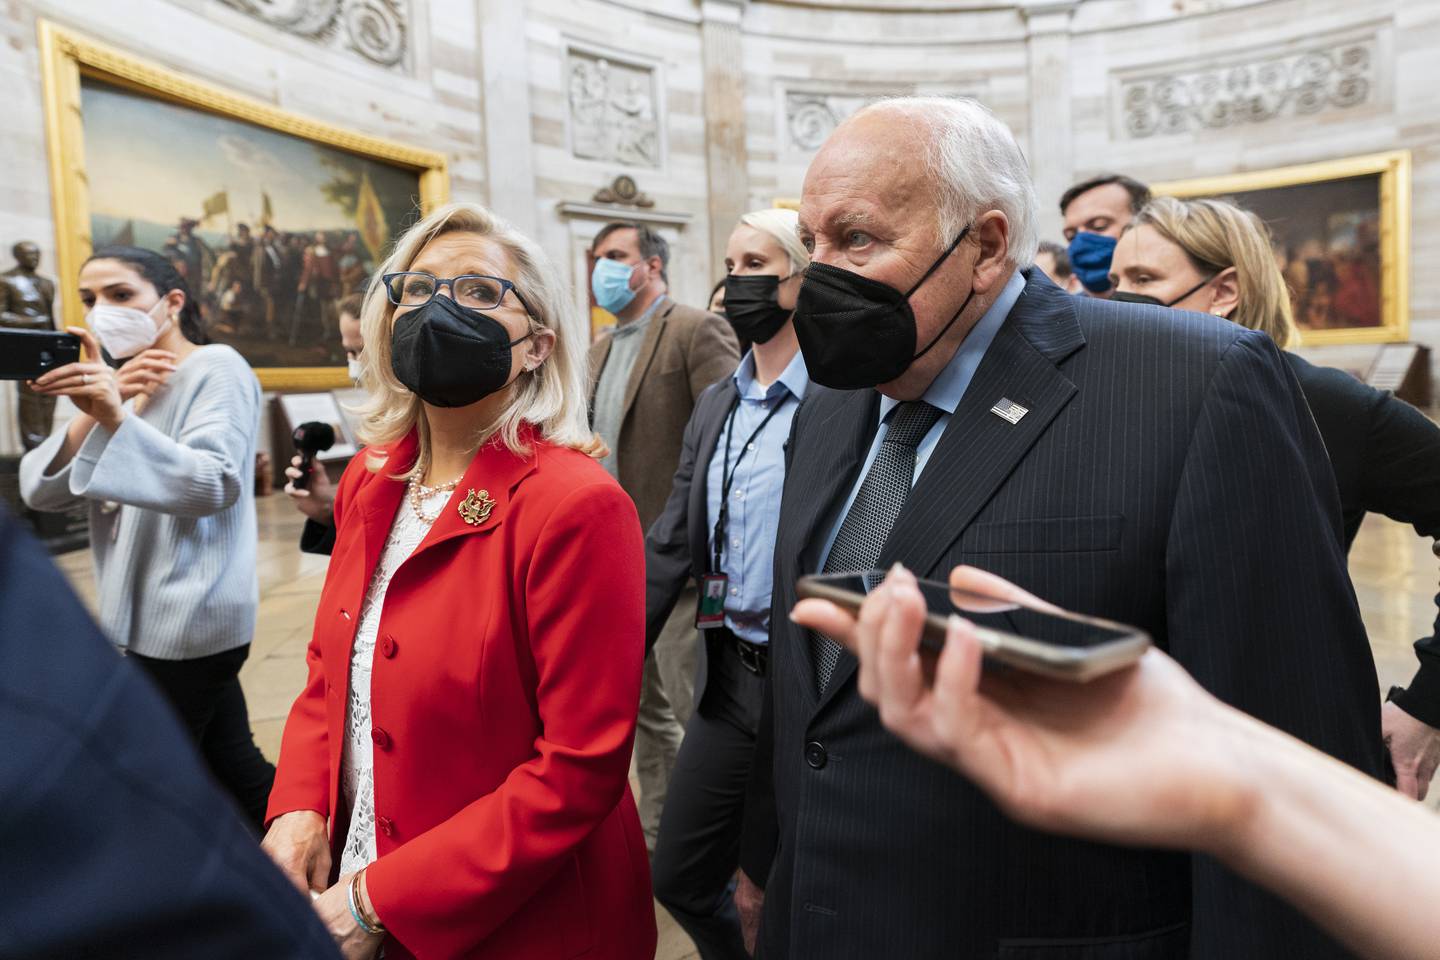 Former US vice president Dick Cheney walks with his daughter Liz Cheney, vice chair of the House panel investigating the January 6 US Capitol attacks, in the Capitol Rotunda in Washington last week. AP Photo